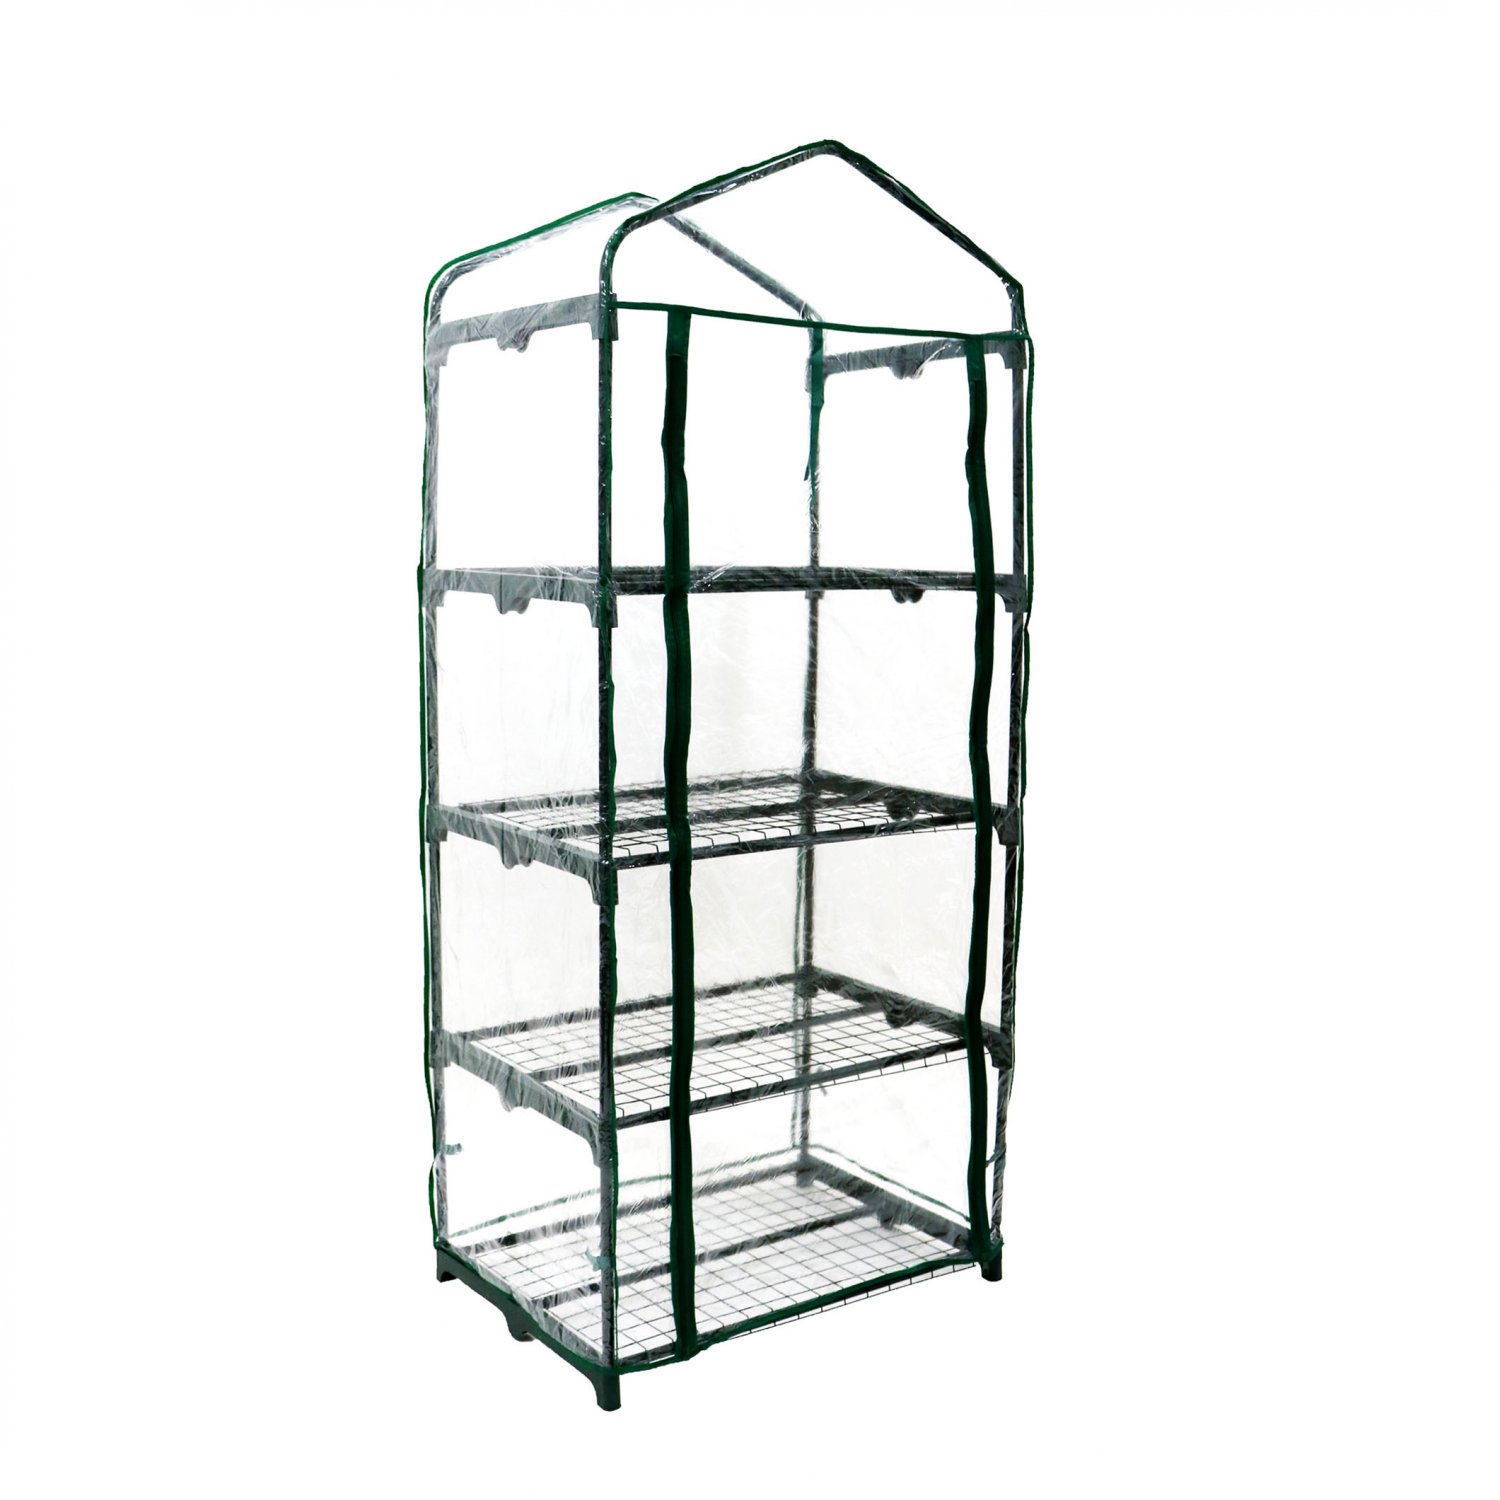 Replacement Spare PVC Cover for 4 Tier Mini Garden Greenhouse